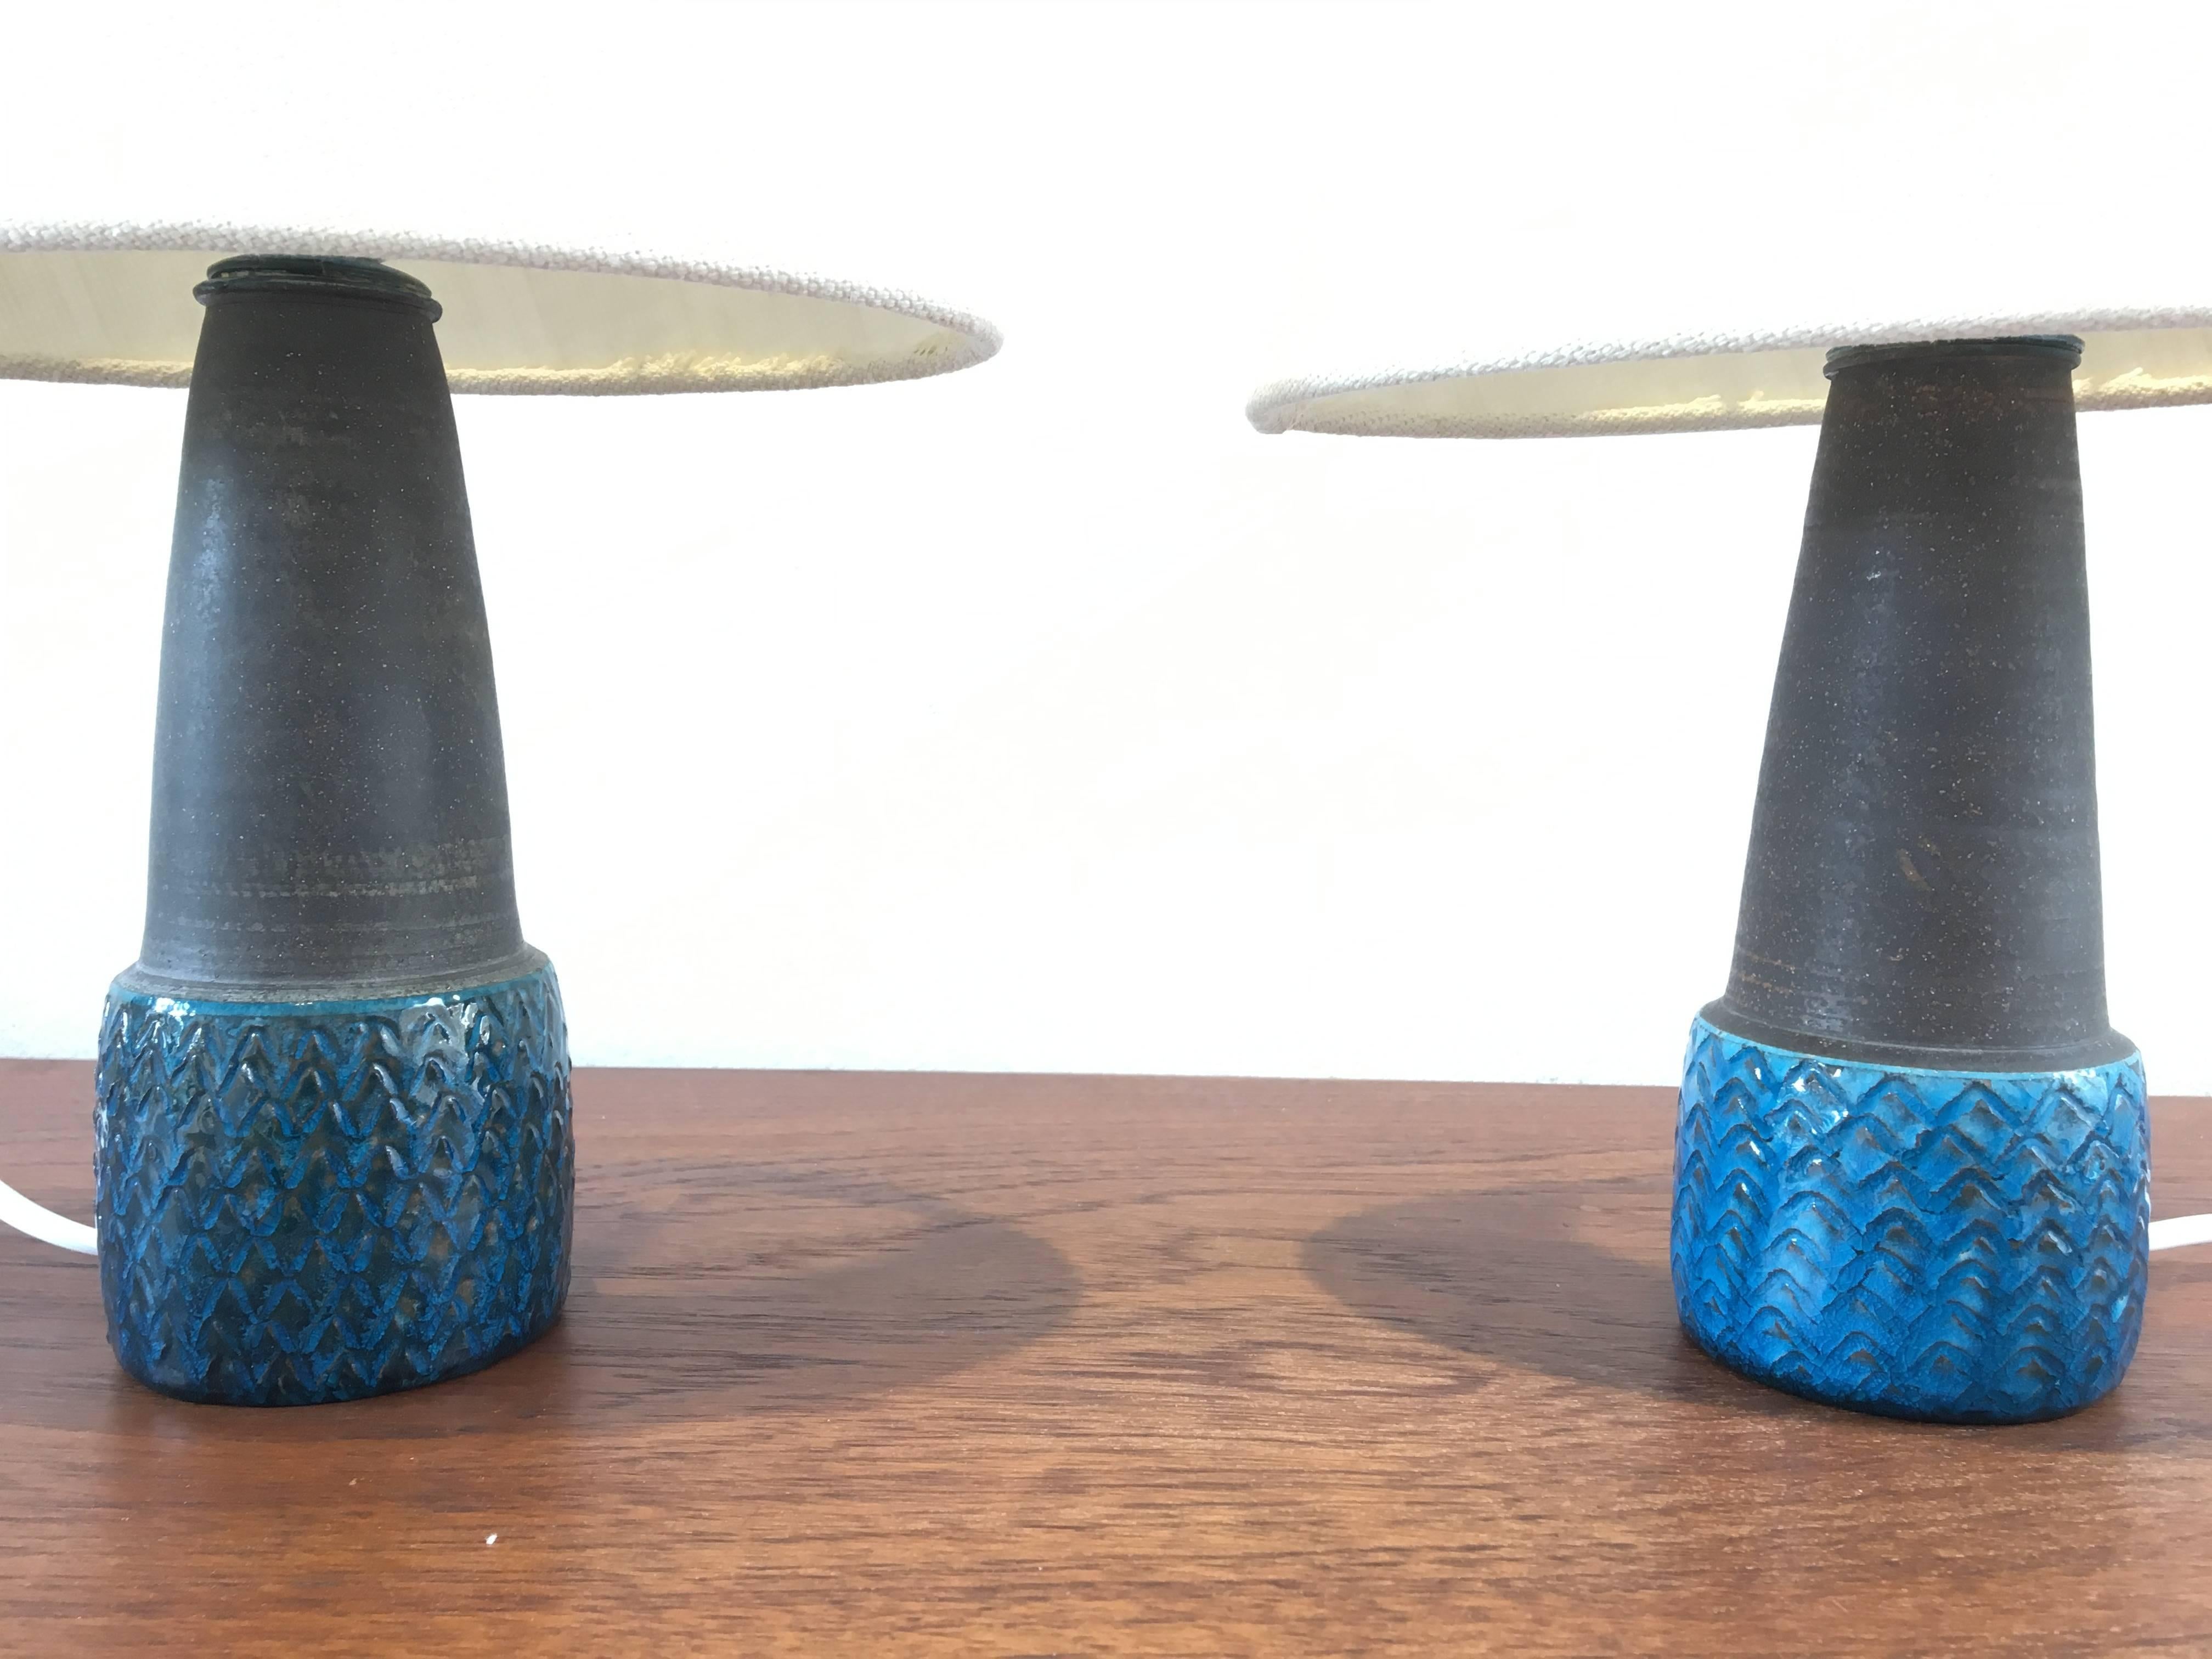 This pair of small stoneware table lamps was designed by Nils Kähler and made in the 1960s by Herman A Kähler Ceramic (HAK) in Denmark. Both lamps have colored glaze covering an geometrically shaped patterns. The top is made from unglazed smooth